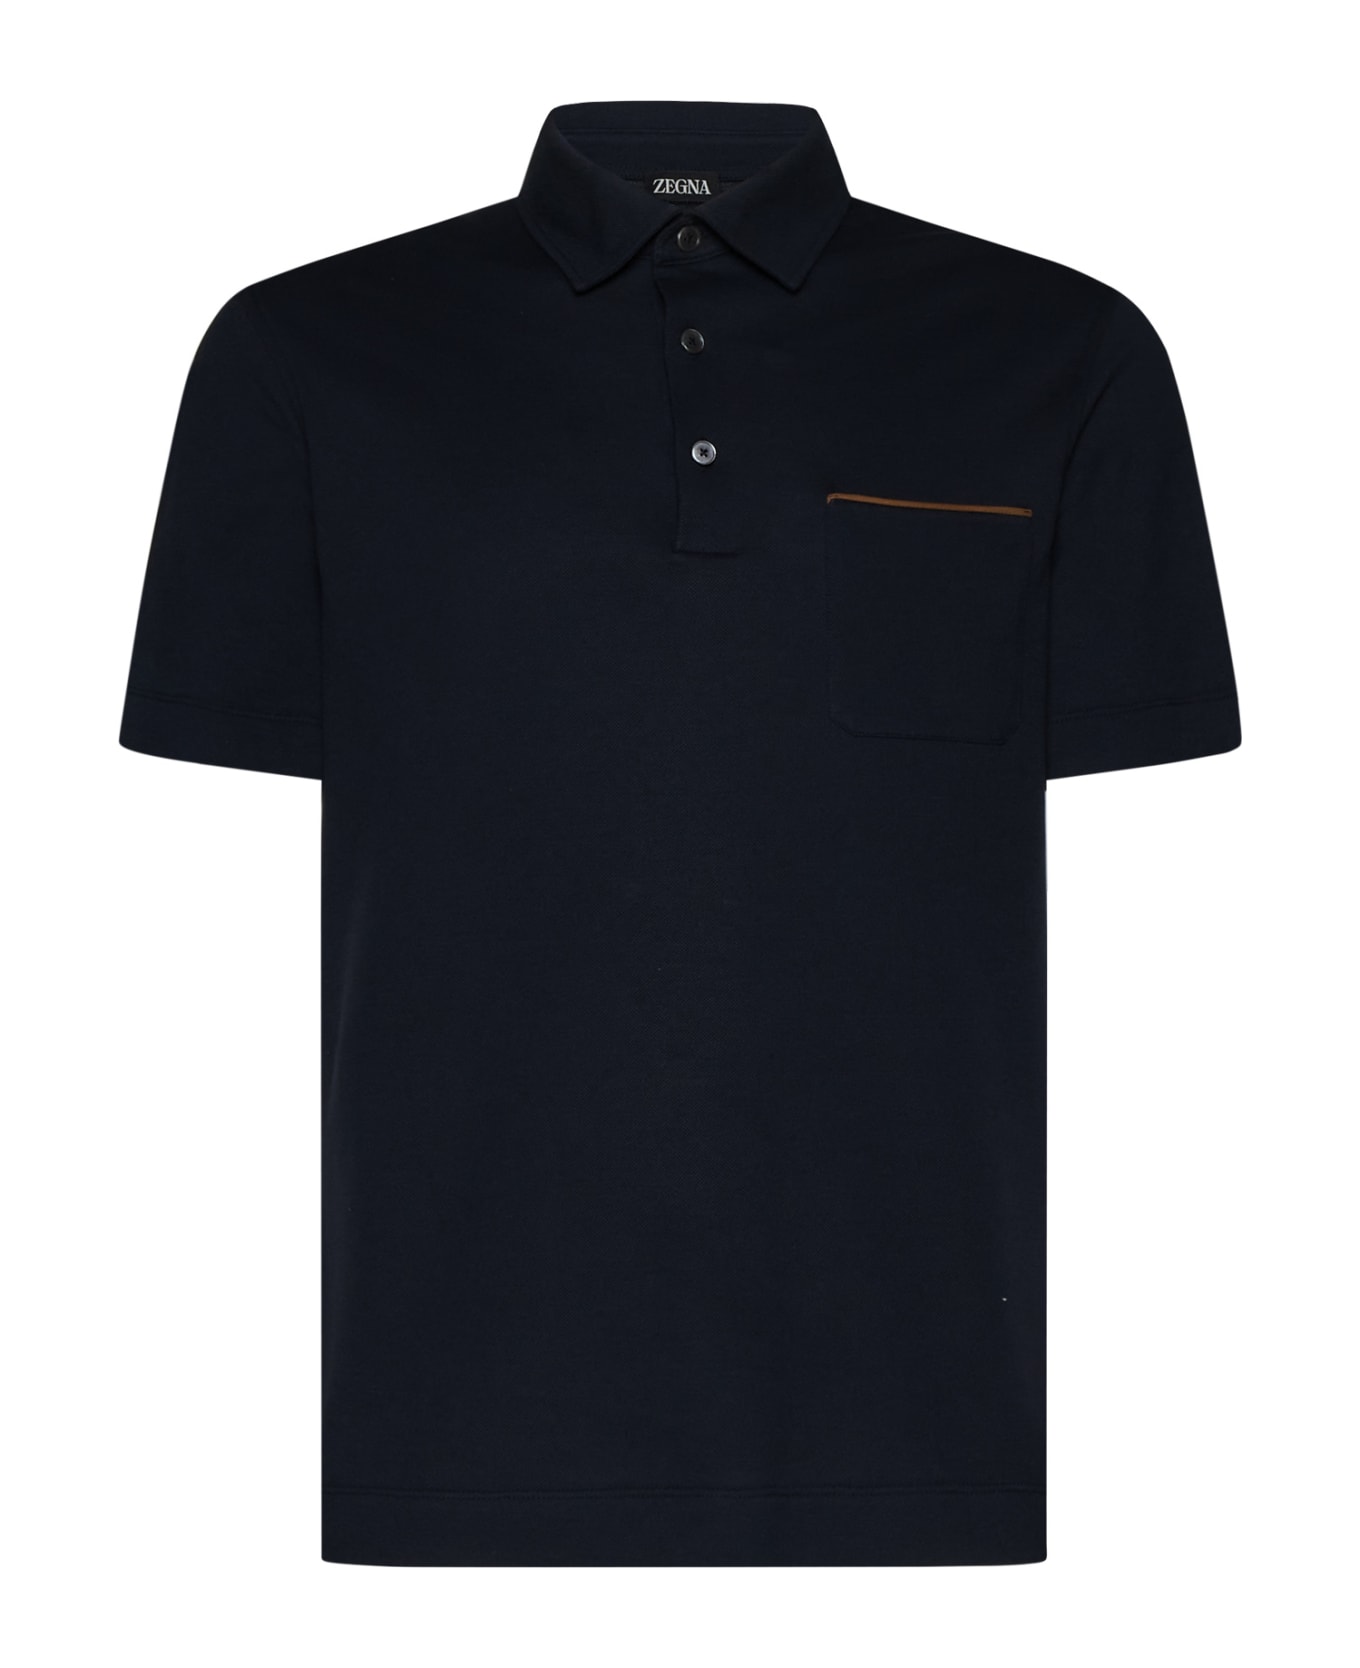 Zegna Polo Shirt - Navy ポロシャツ